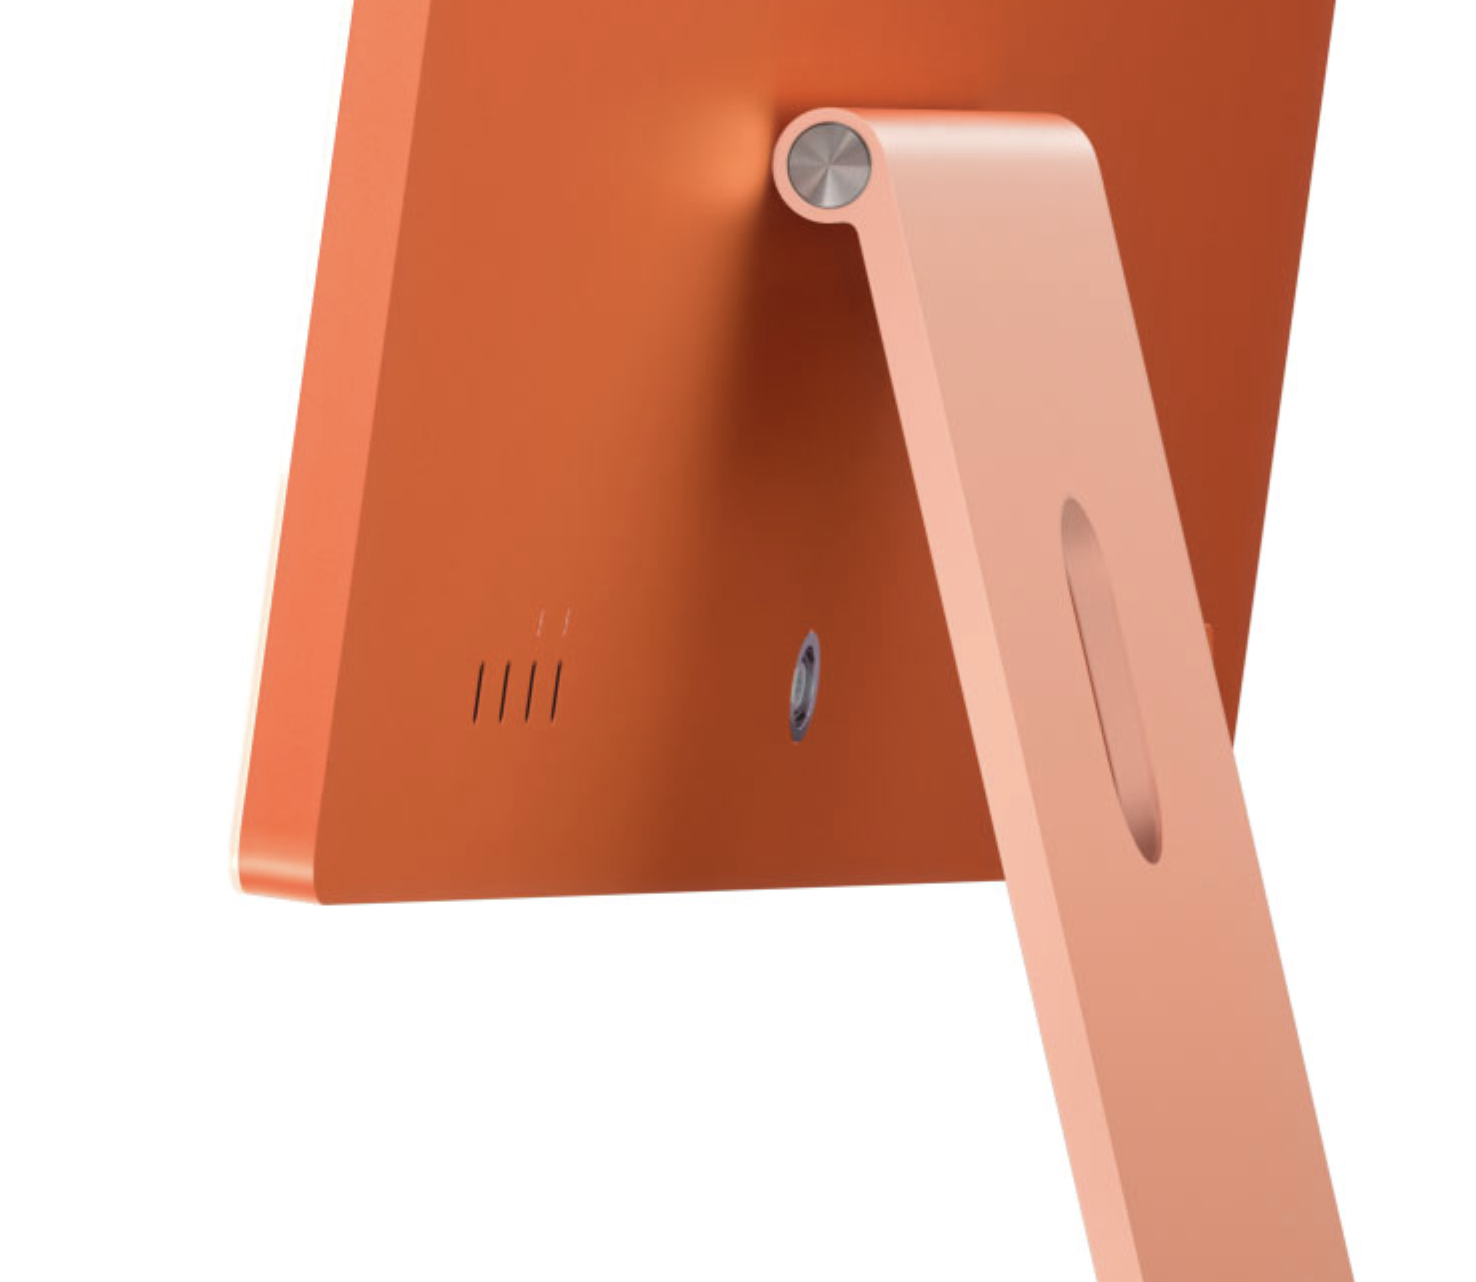 An image of the back of the new peach-colored iMac